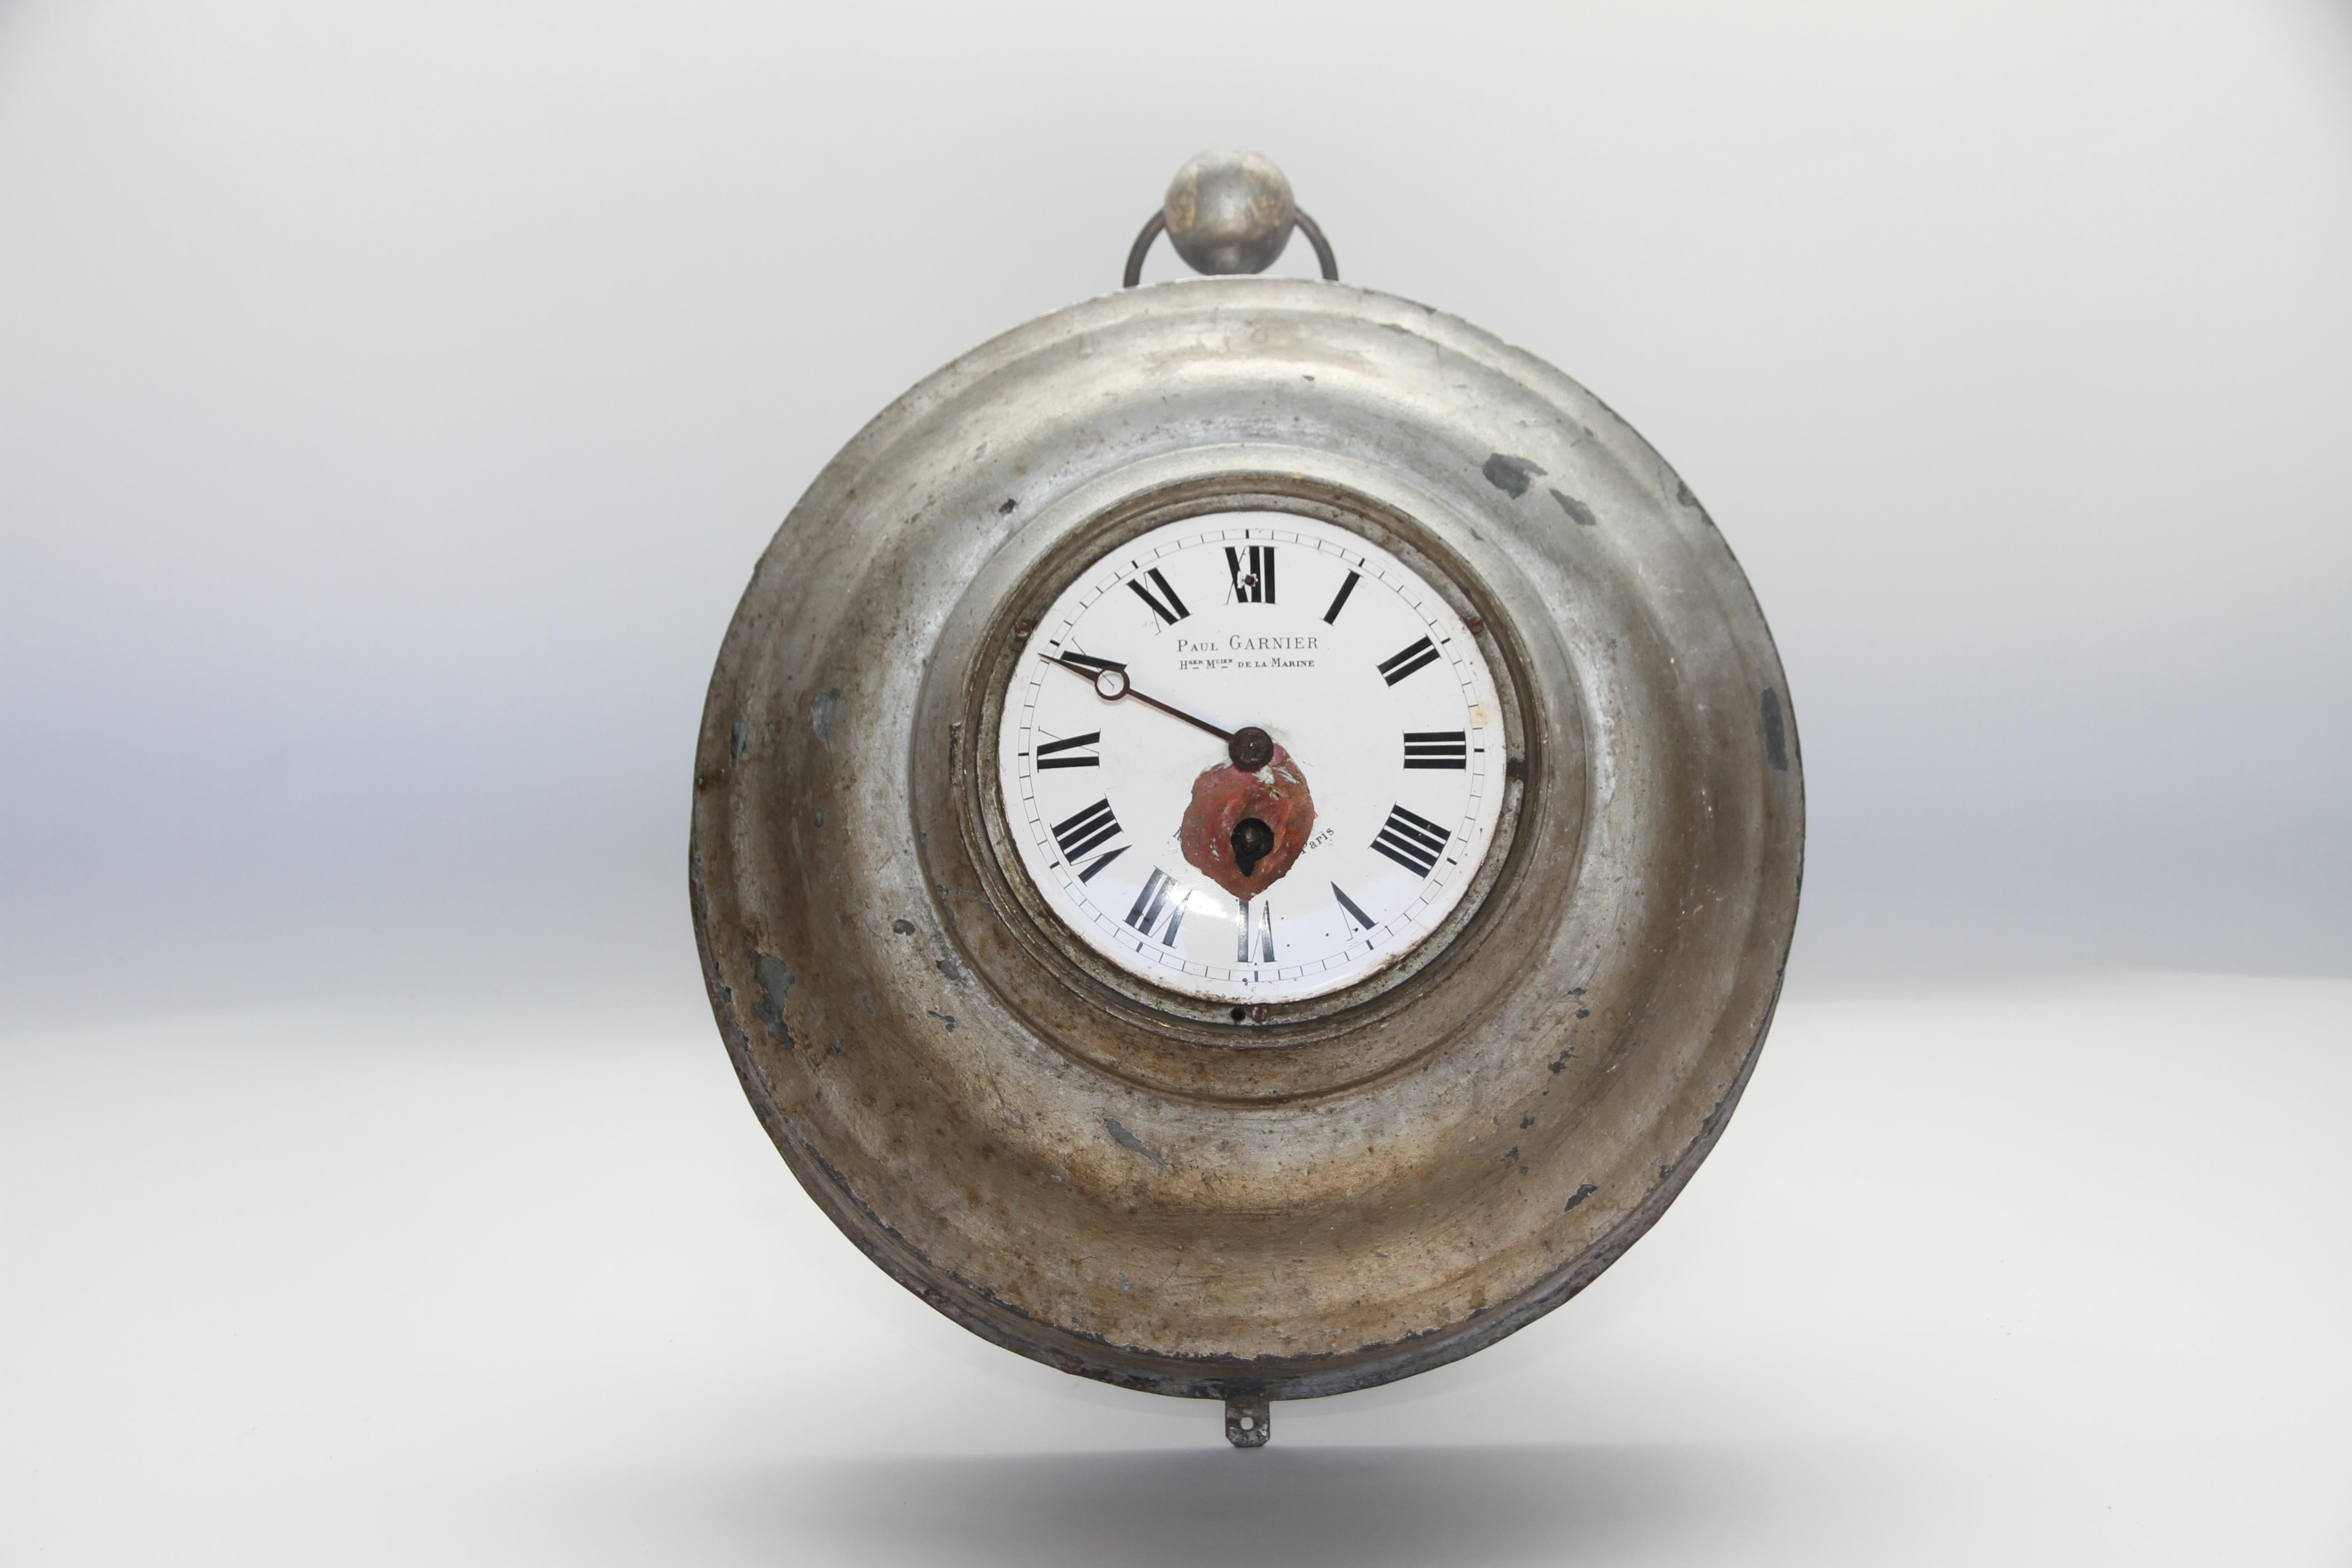 An antique French wall clock. Made of zinc the 6.25